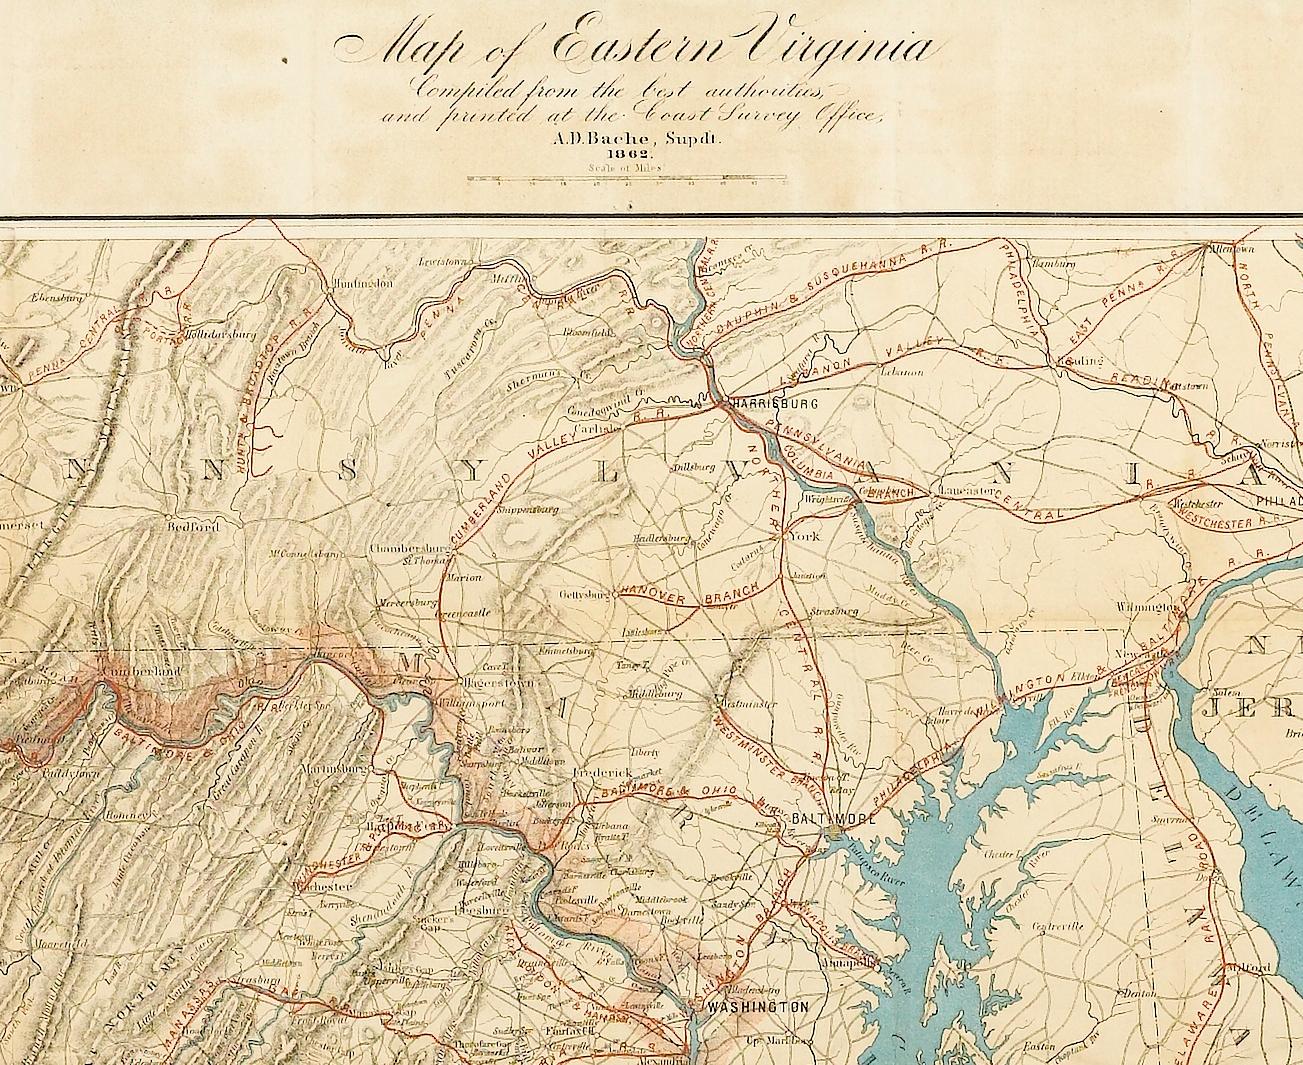 This is an 1862 map of Eastern Virginia, compiled by Walter L. Nicholson for the U.S. Coast Survey. This large chromolithographed pocket map covers the area from the Chesapeake Bay to Lexington, VA. The map was originally issued folding into a